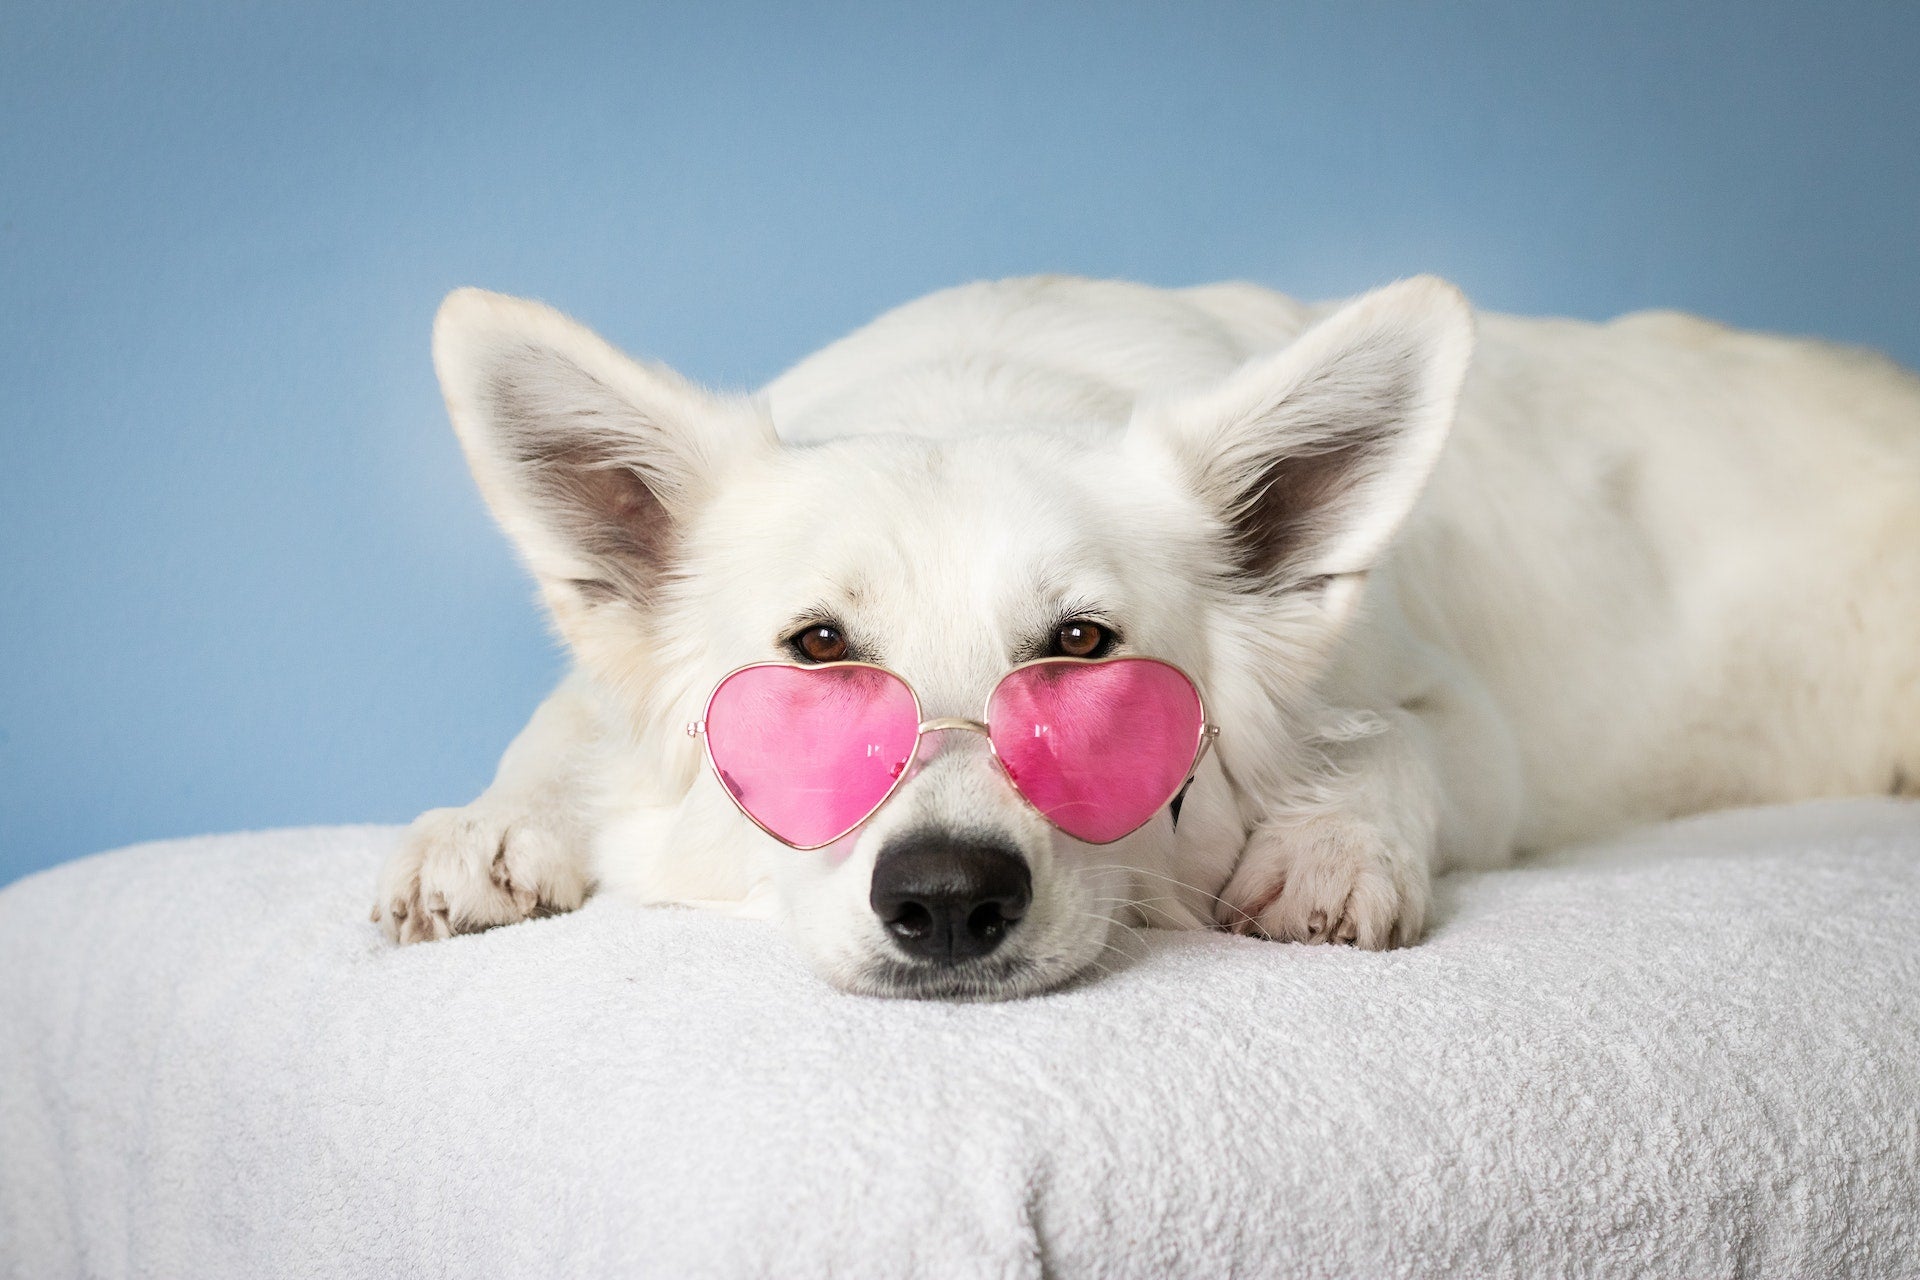 white fluffy dog wearing pink heart shaped glasses